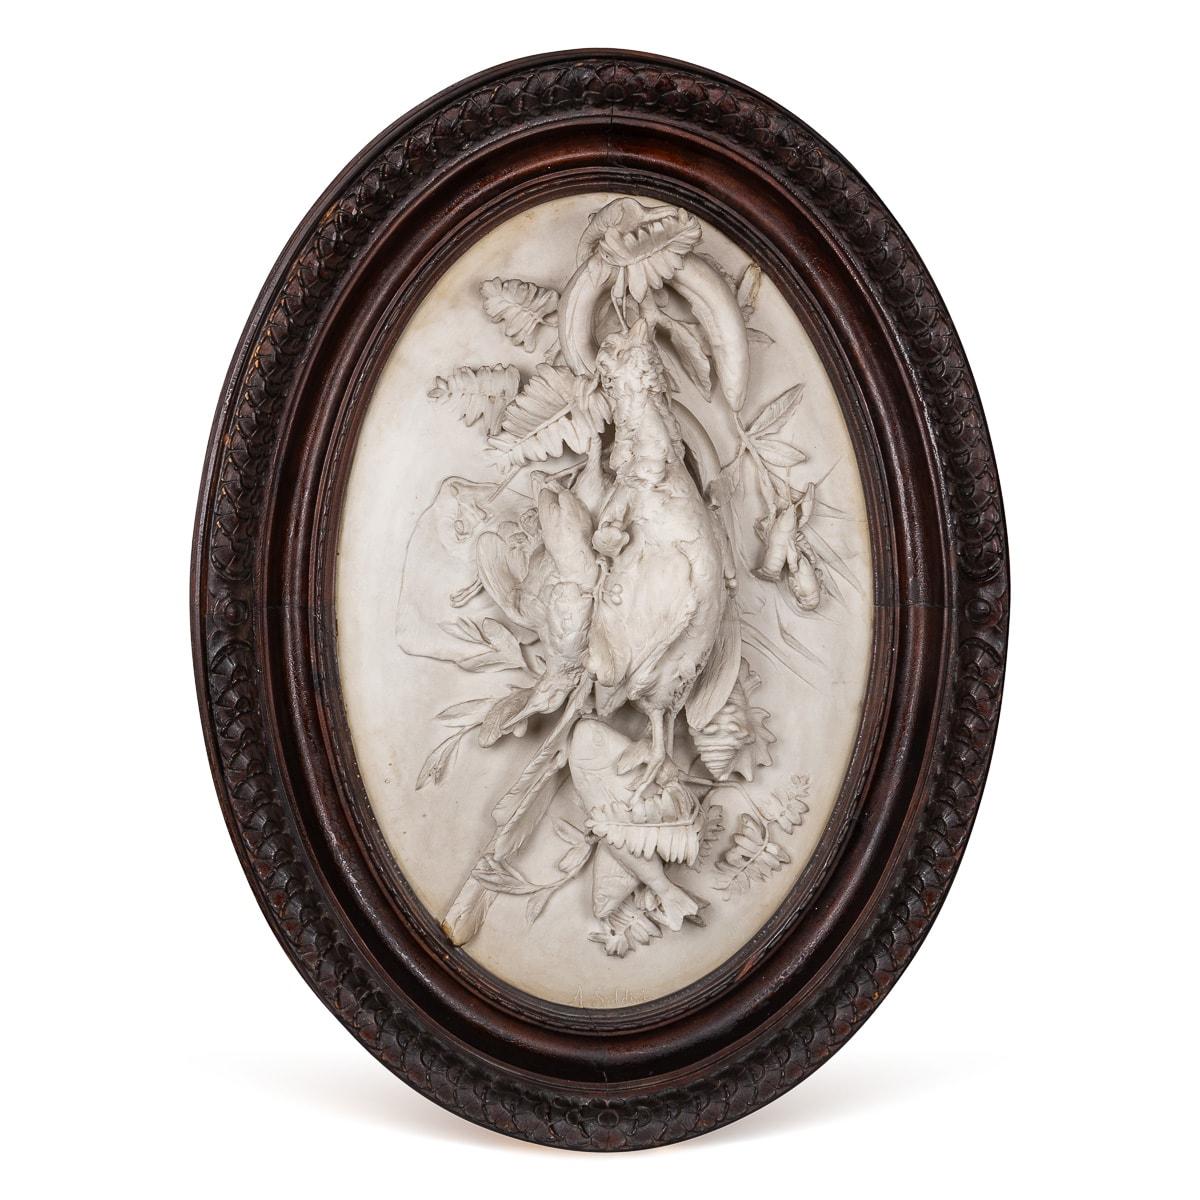 Antique 19th Century pair of Italian nature morte marble plaques, crafted by Arnoldo Soldini (1861-1936), using the famous white marble sourced from Carrara. One plaque showcases birds and a hare, while the other features a fish and grouse. Each